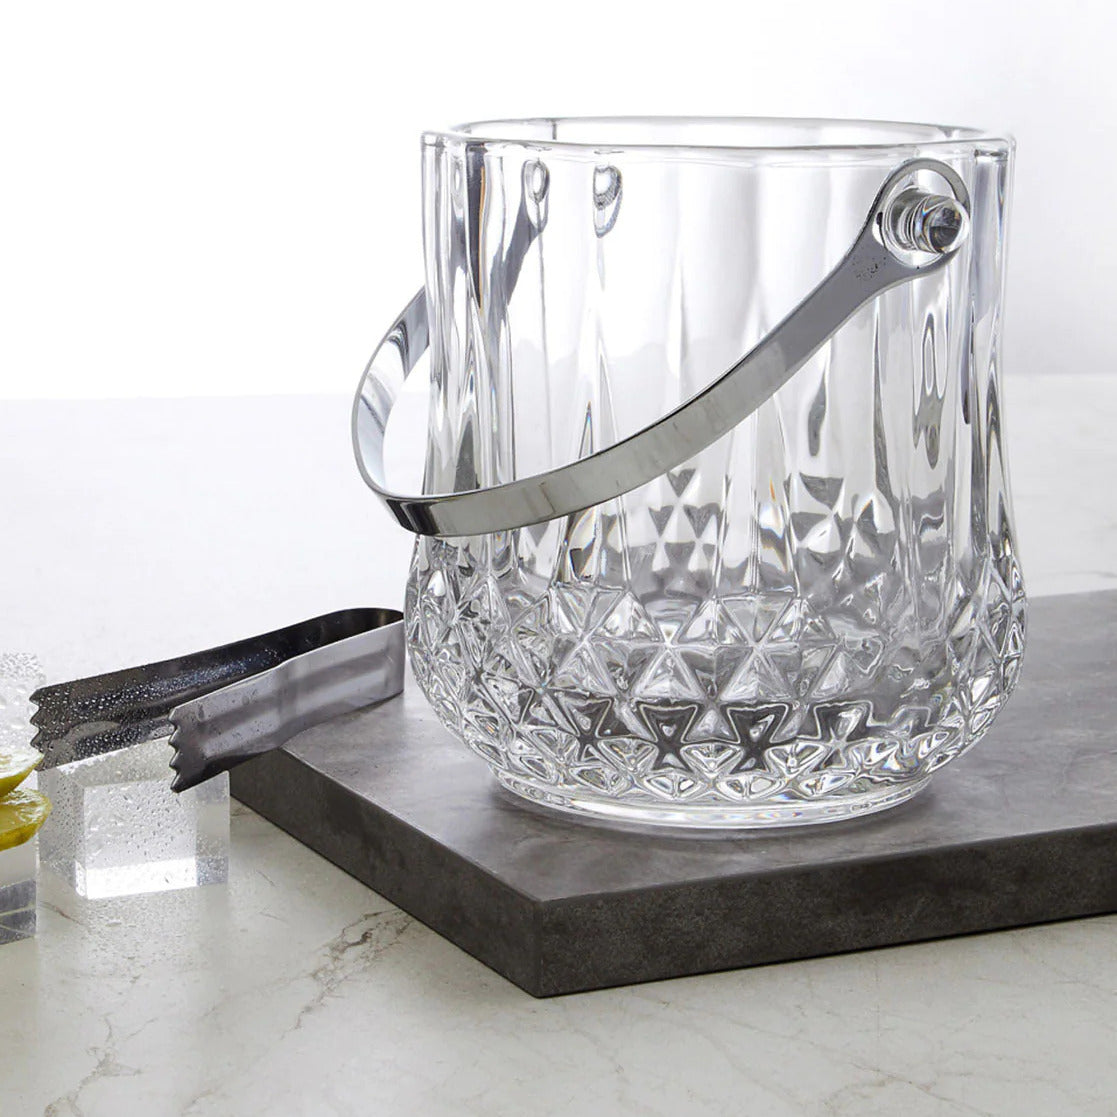 European 8 Pcs Decanter with Glasses and Ice bucket